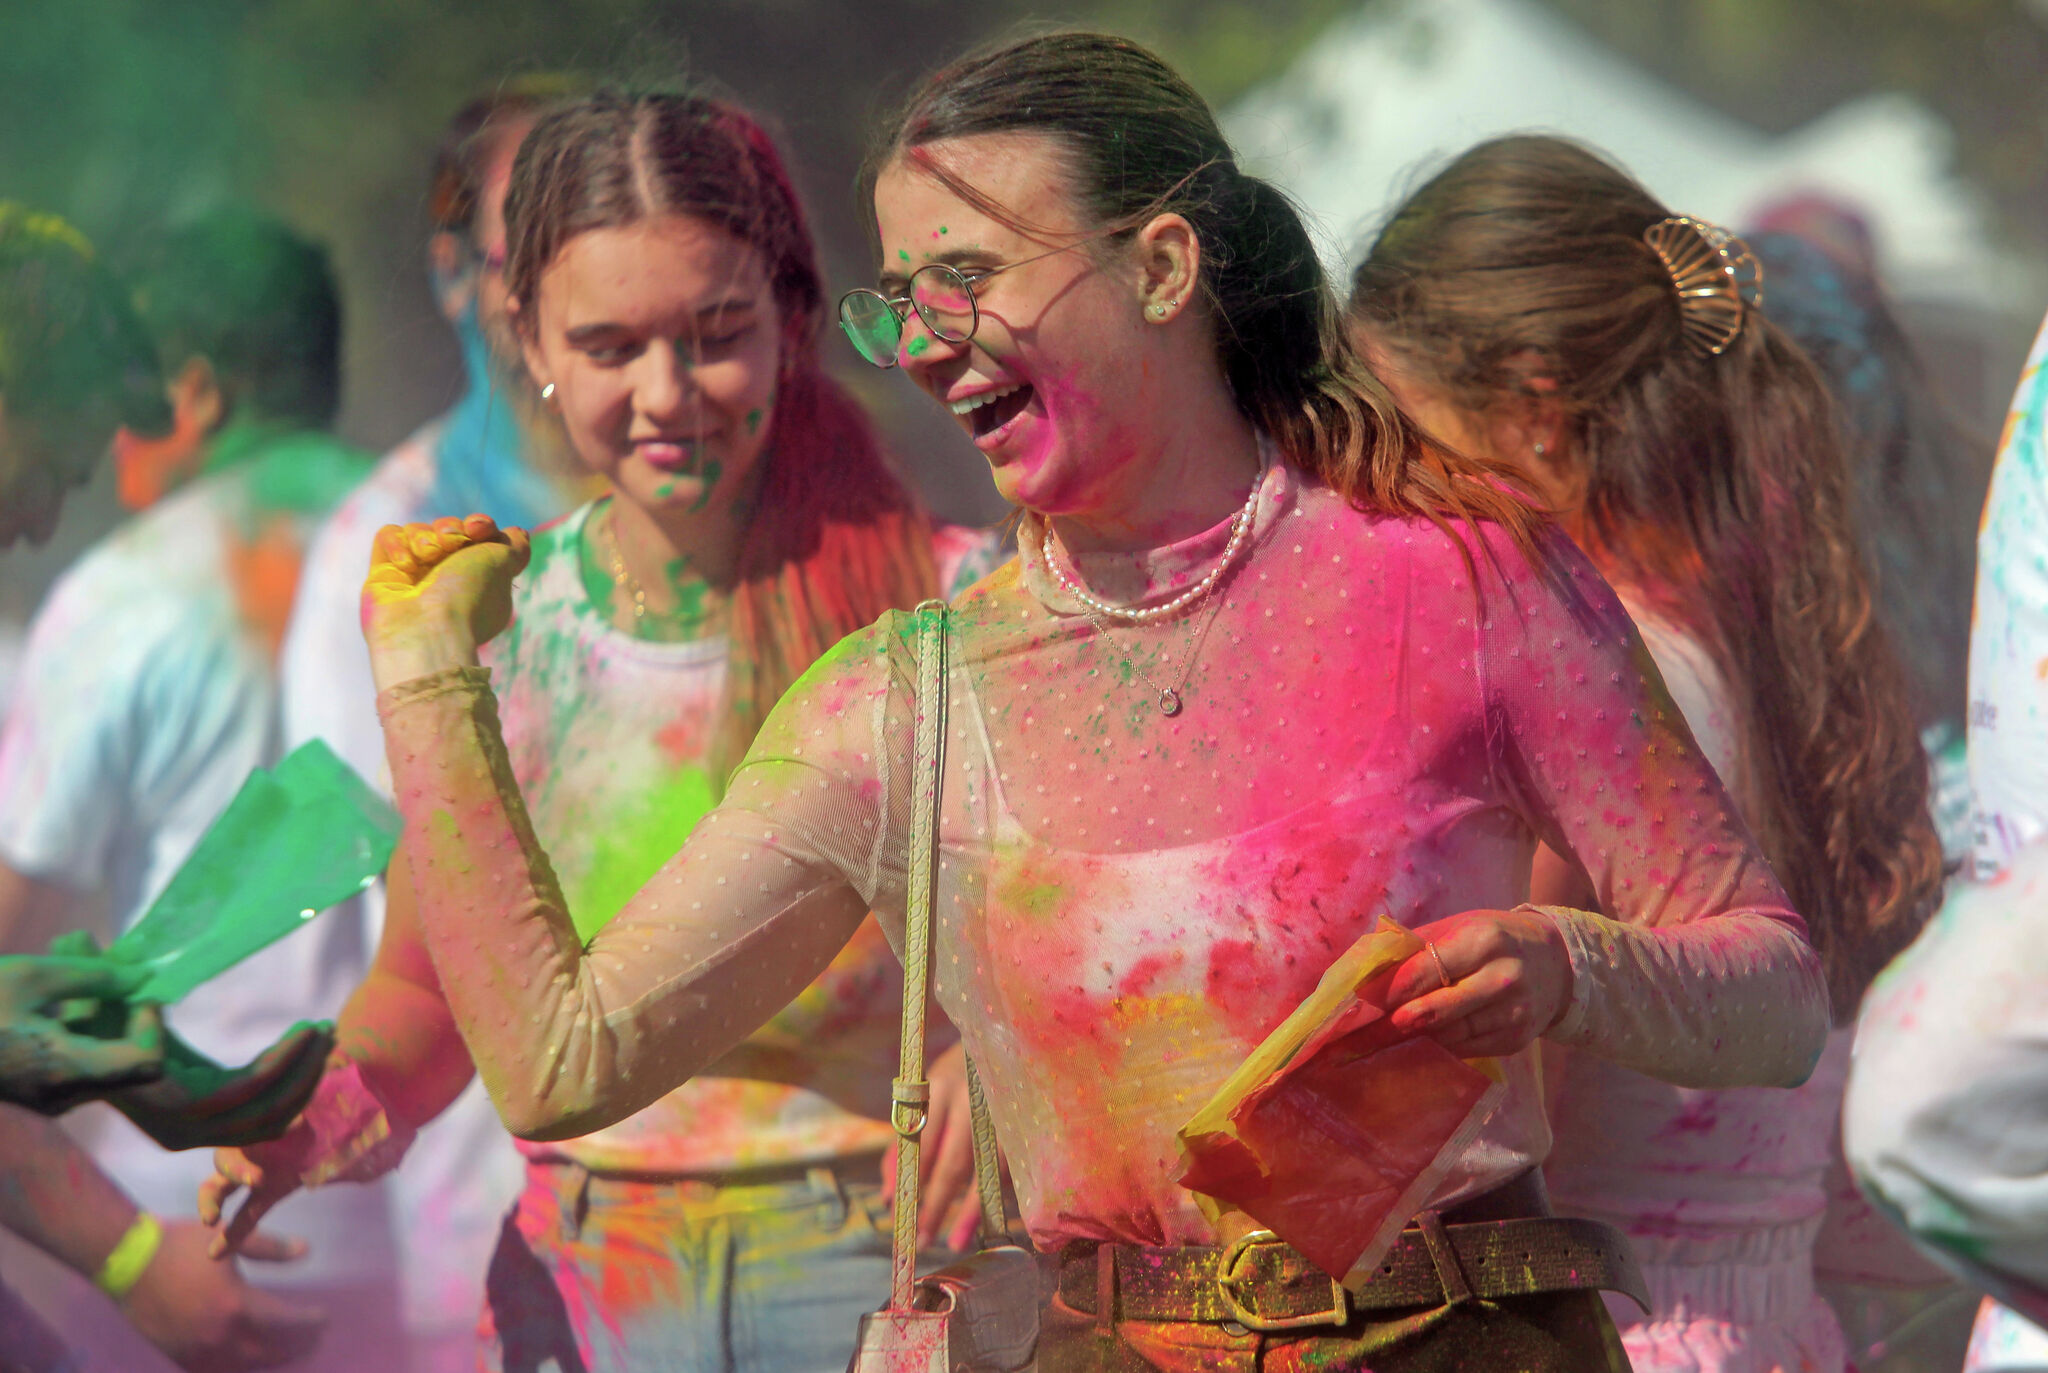 In Photos Colors fly as Greenwich residents celebrate the Hindu festival of Holi hq nude image